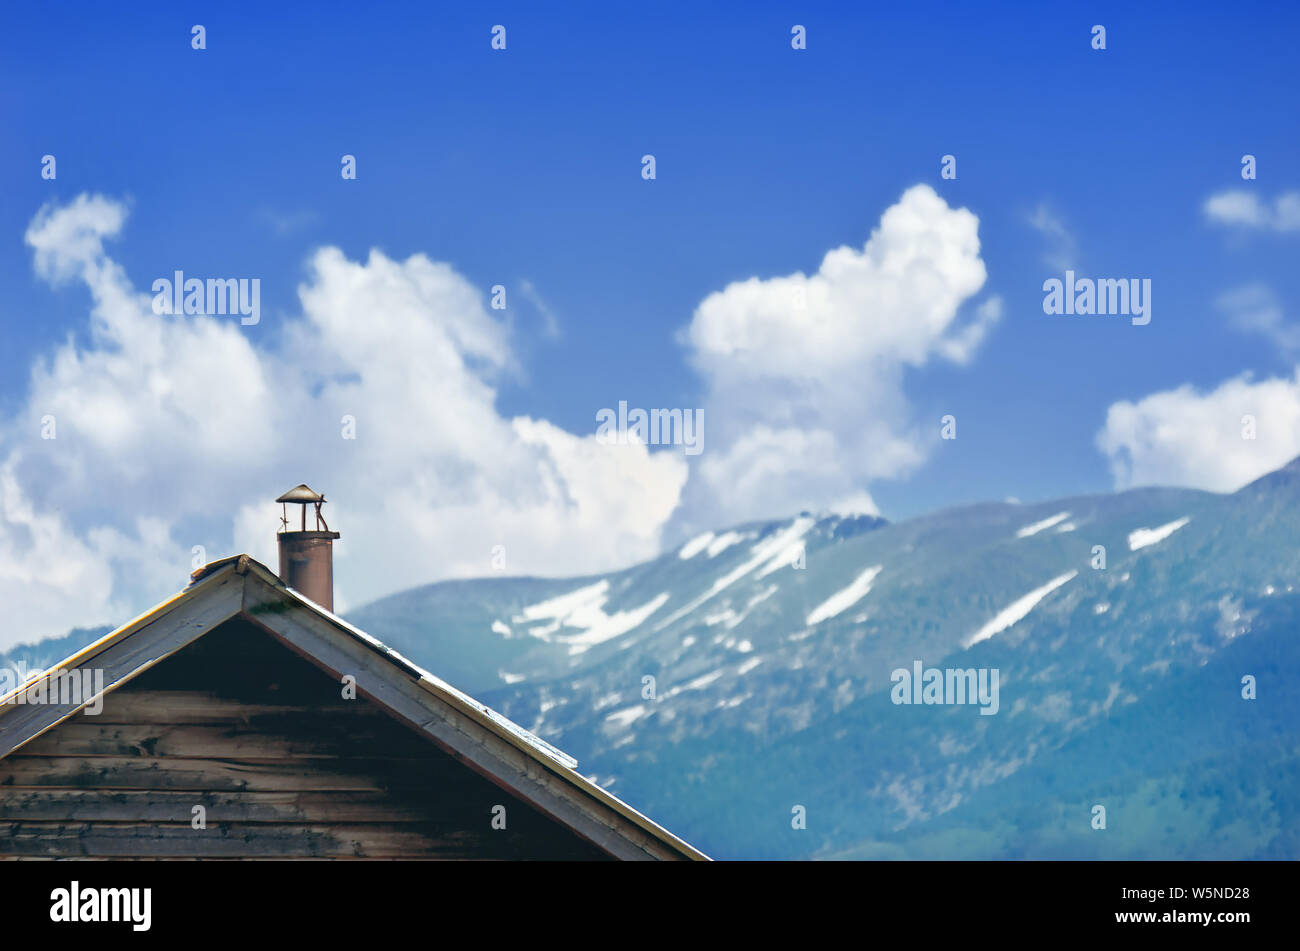 Gable End of an Aged Cottage with Horizontal Wooden Siding, Metal Chimney. Altai Mountains with White Snow Caps, Kazakhstan. Stock Photo